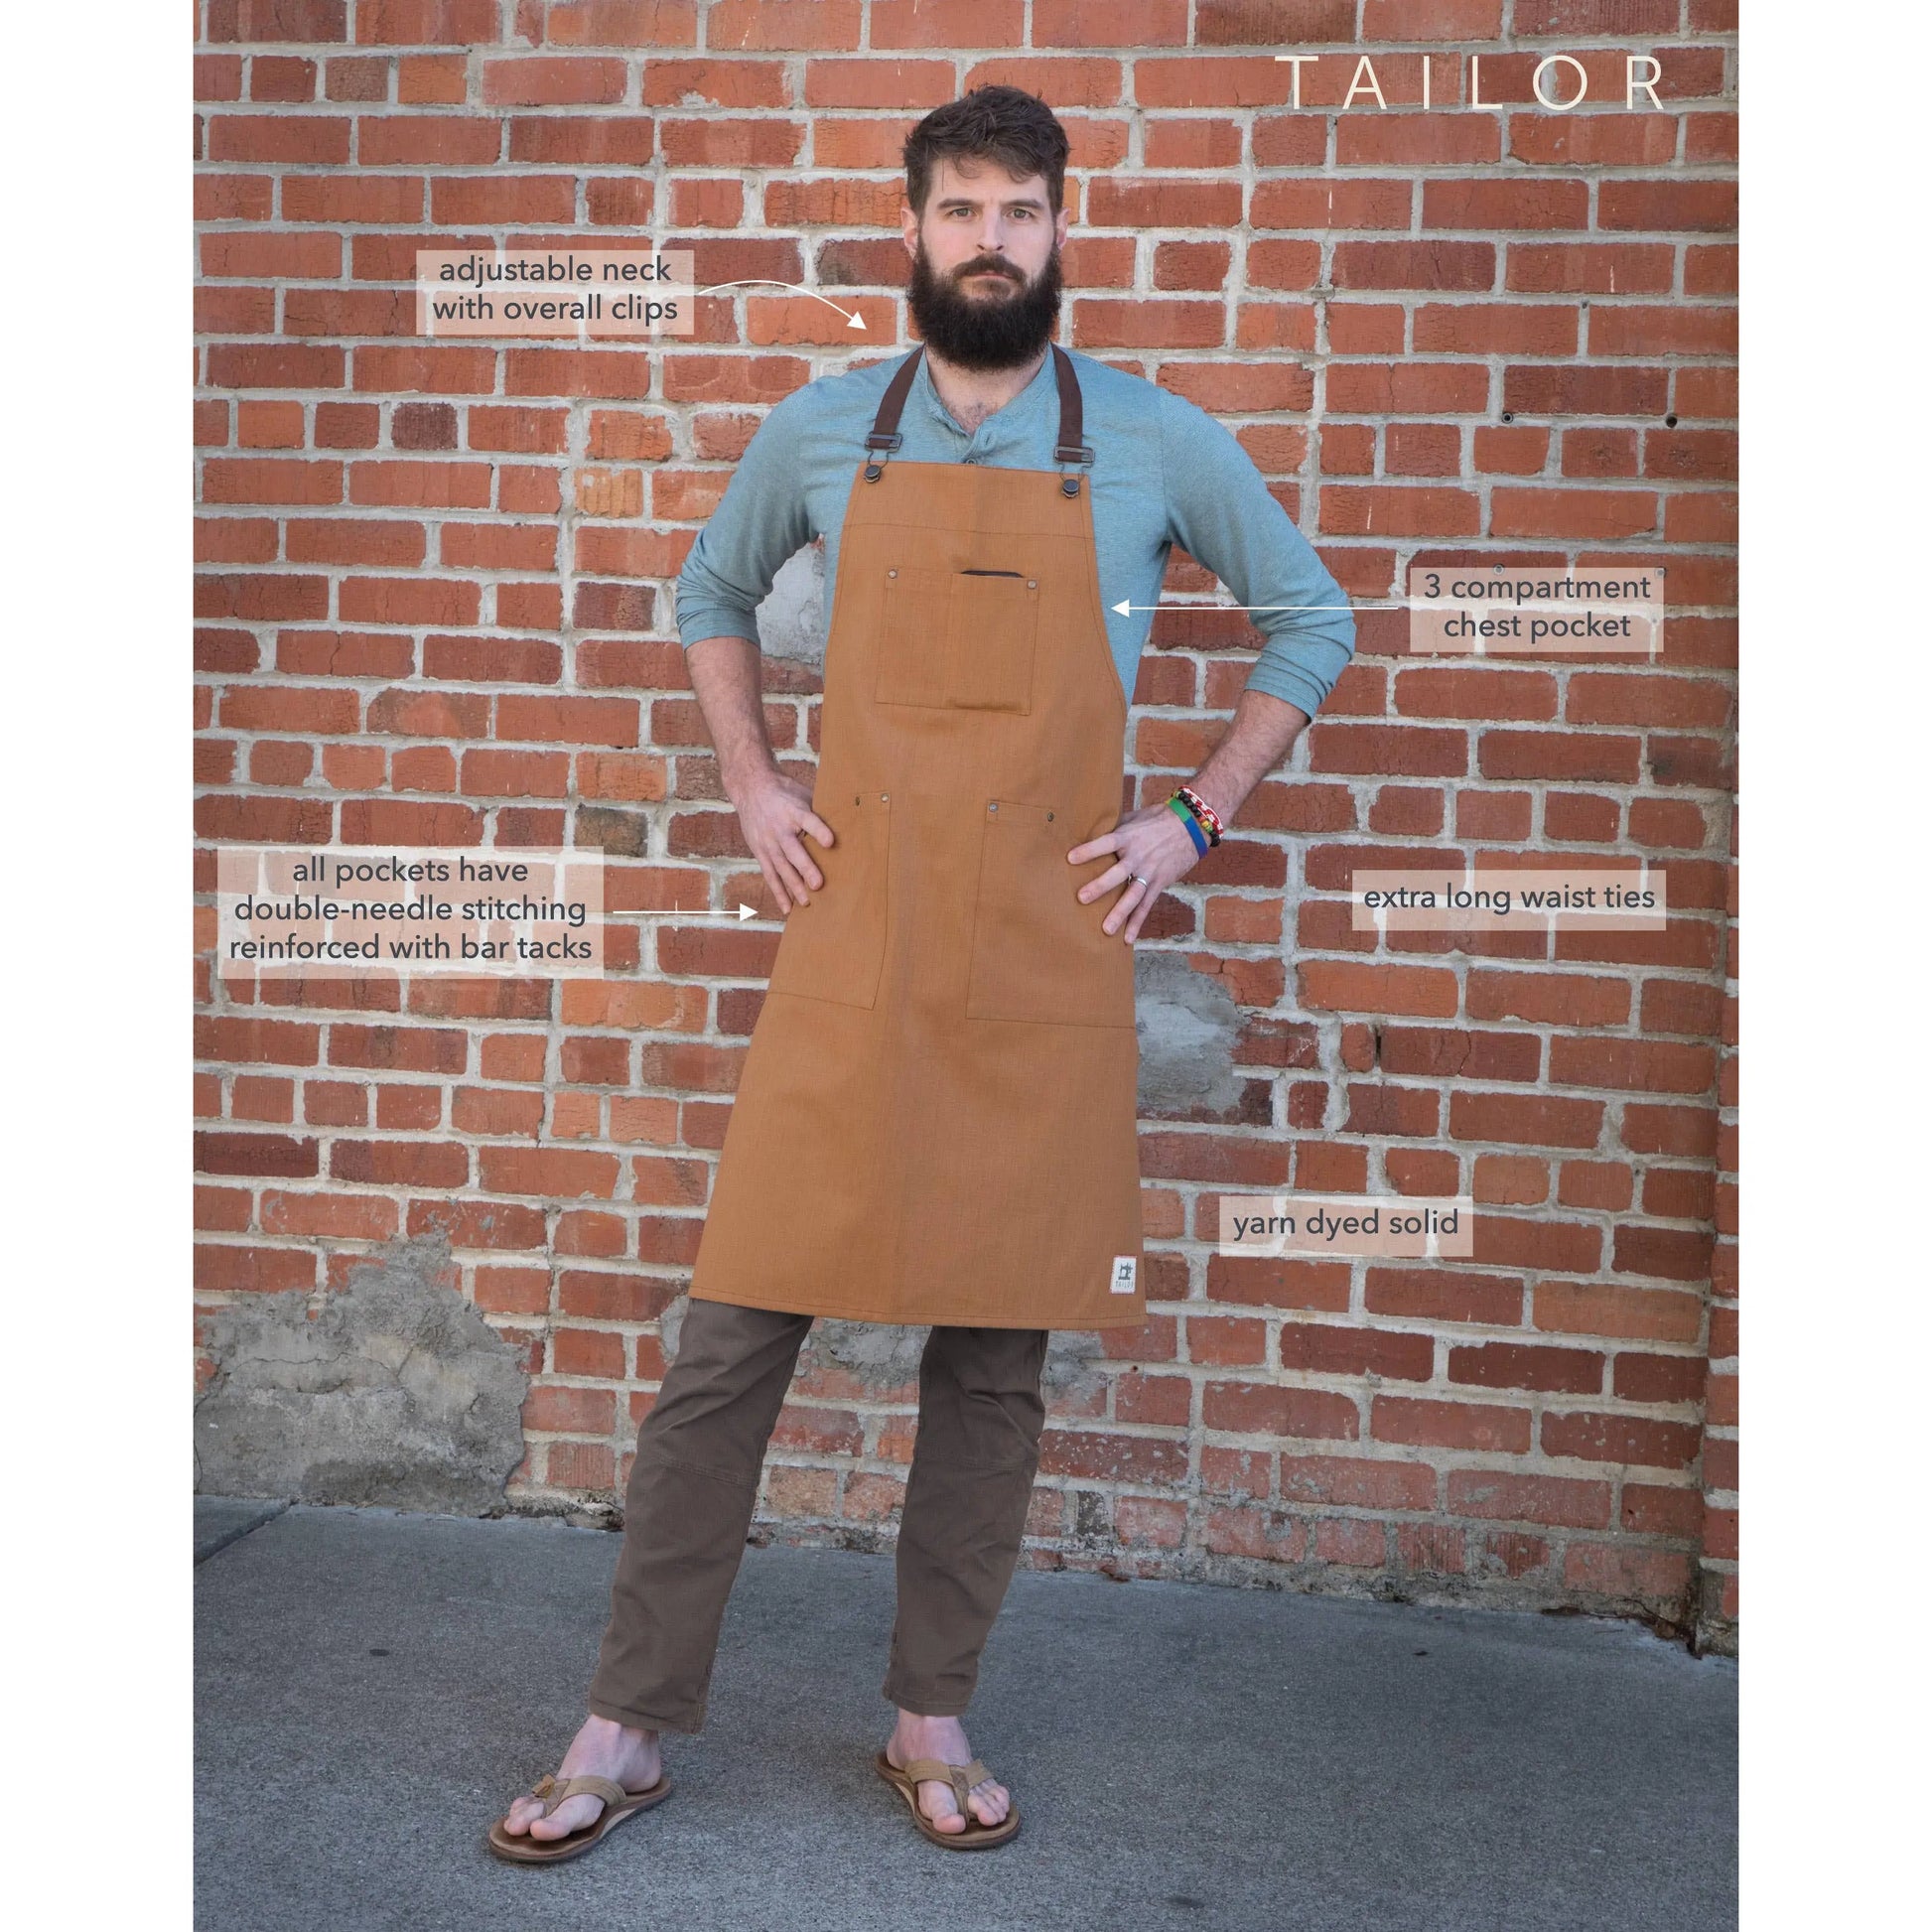 KAF Home Tailor Apron, Canvas Work - Oversized, and Multi-purpose KAF Home